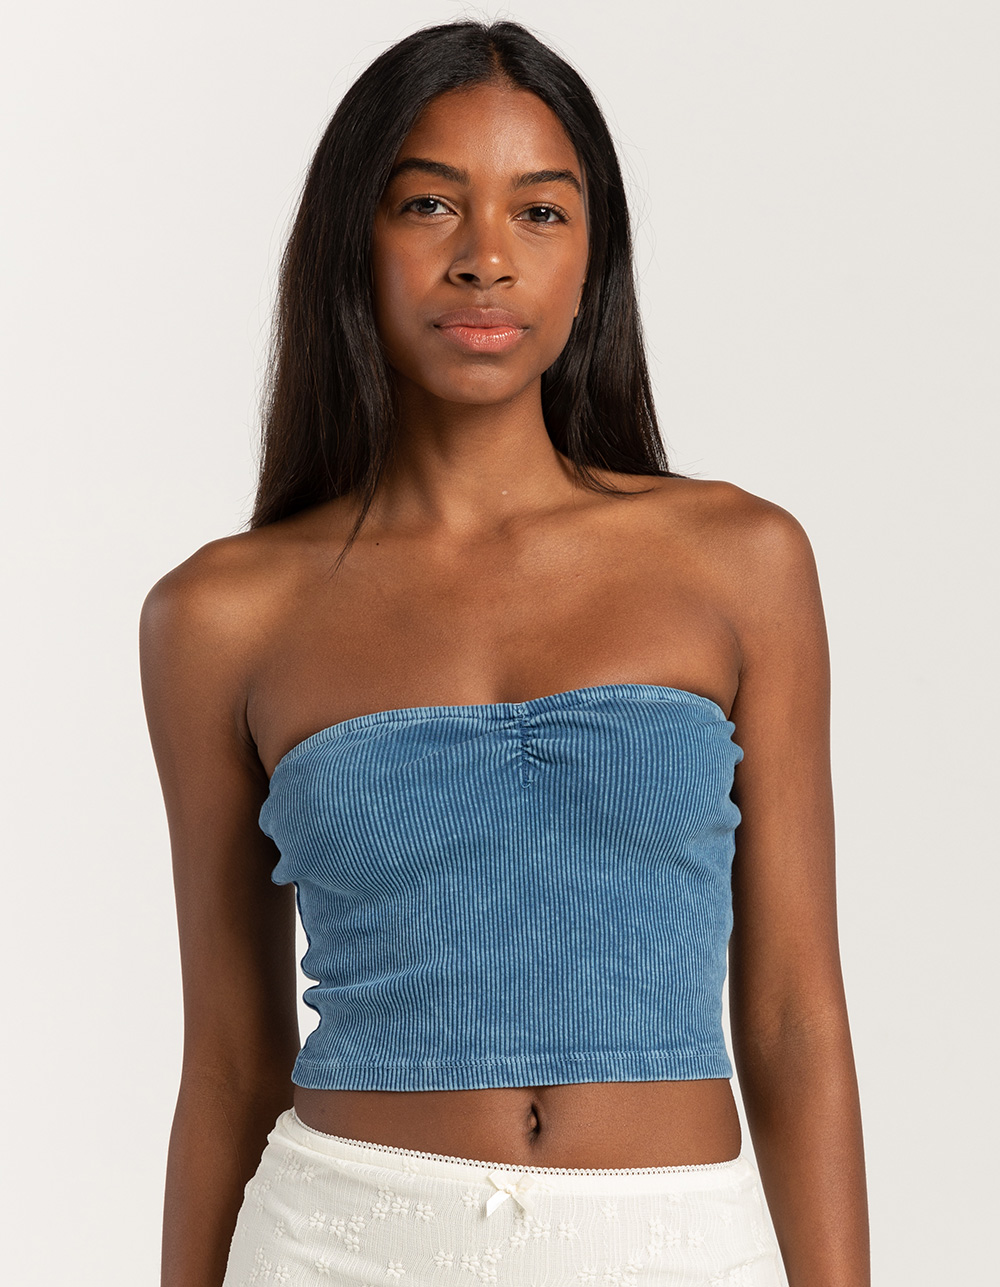 TILLYS Seamless Textured Lace Womens Tube Top